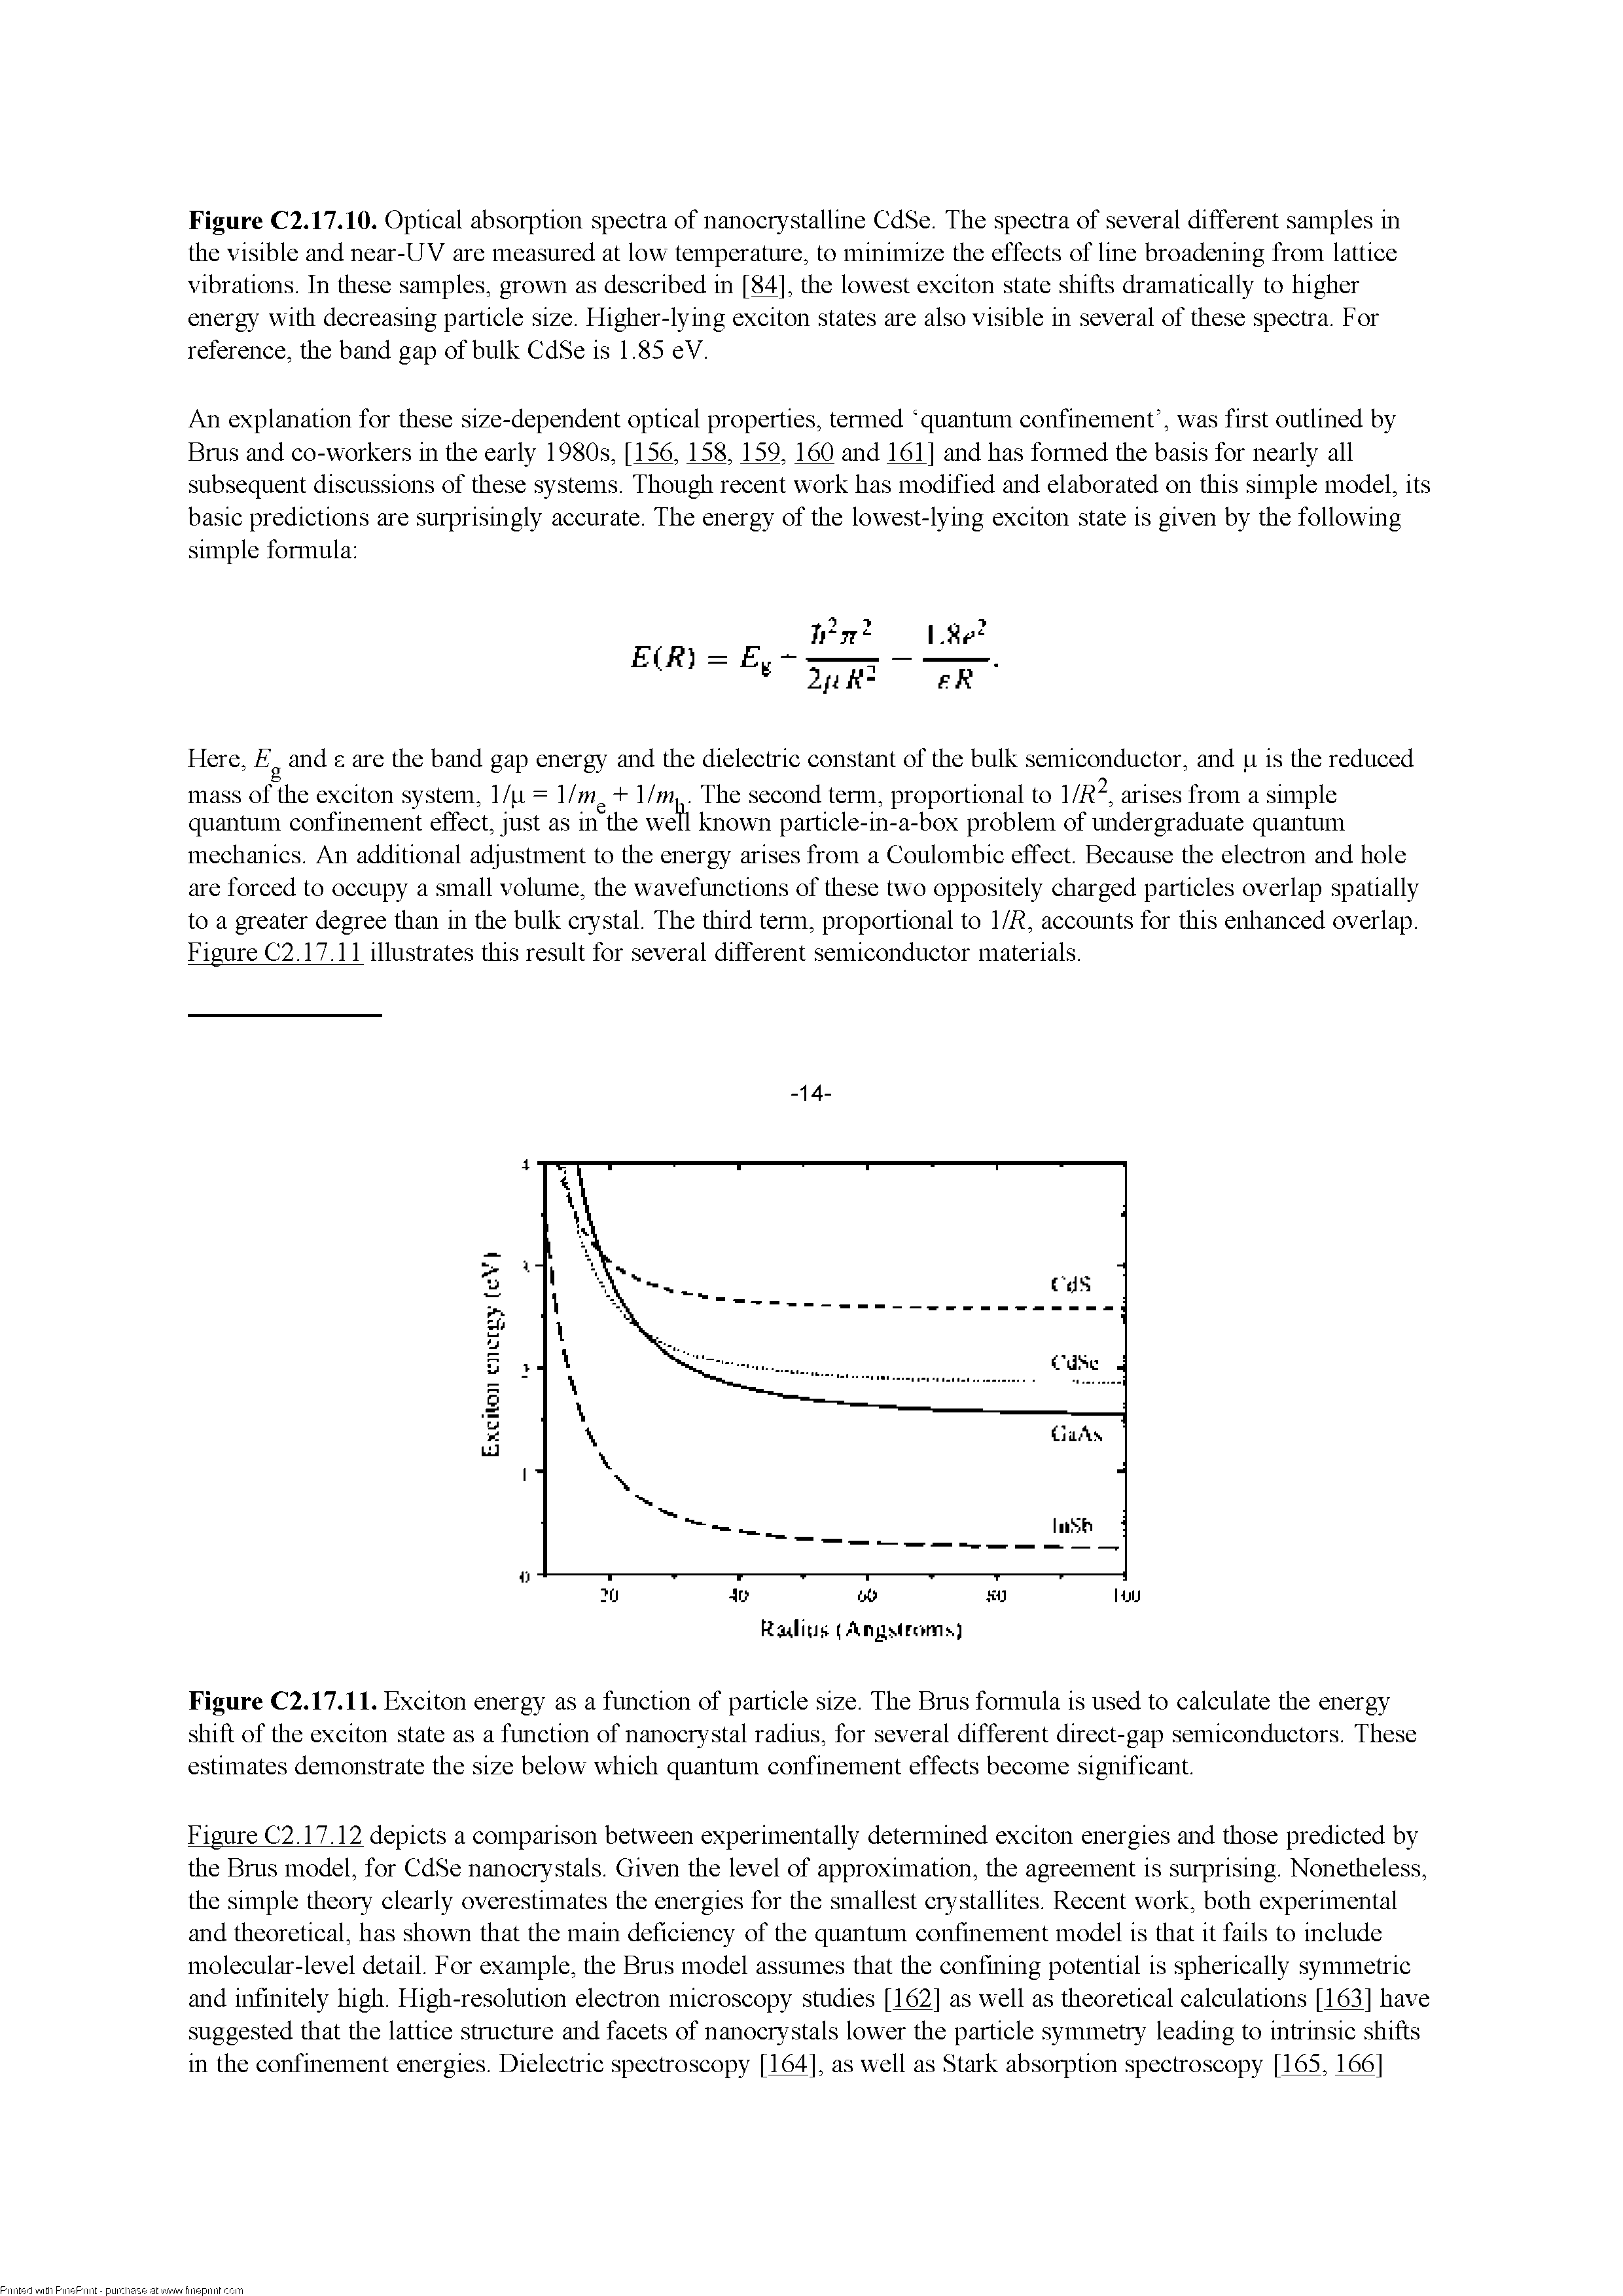 Figure C2.17.11. Exciton energy as a function of particle size. The Bms fonnula is used to calculate the energy shift of the exciton state as a function of nanocrystal radius, for several different direct-gap semiconductors. These estimates demonstrate the size below which quantum confinement effects become significant.